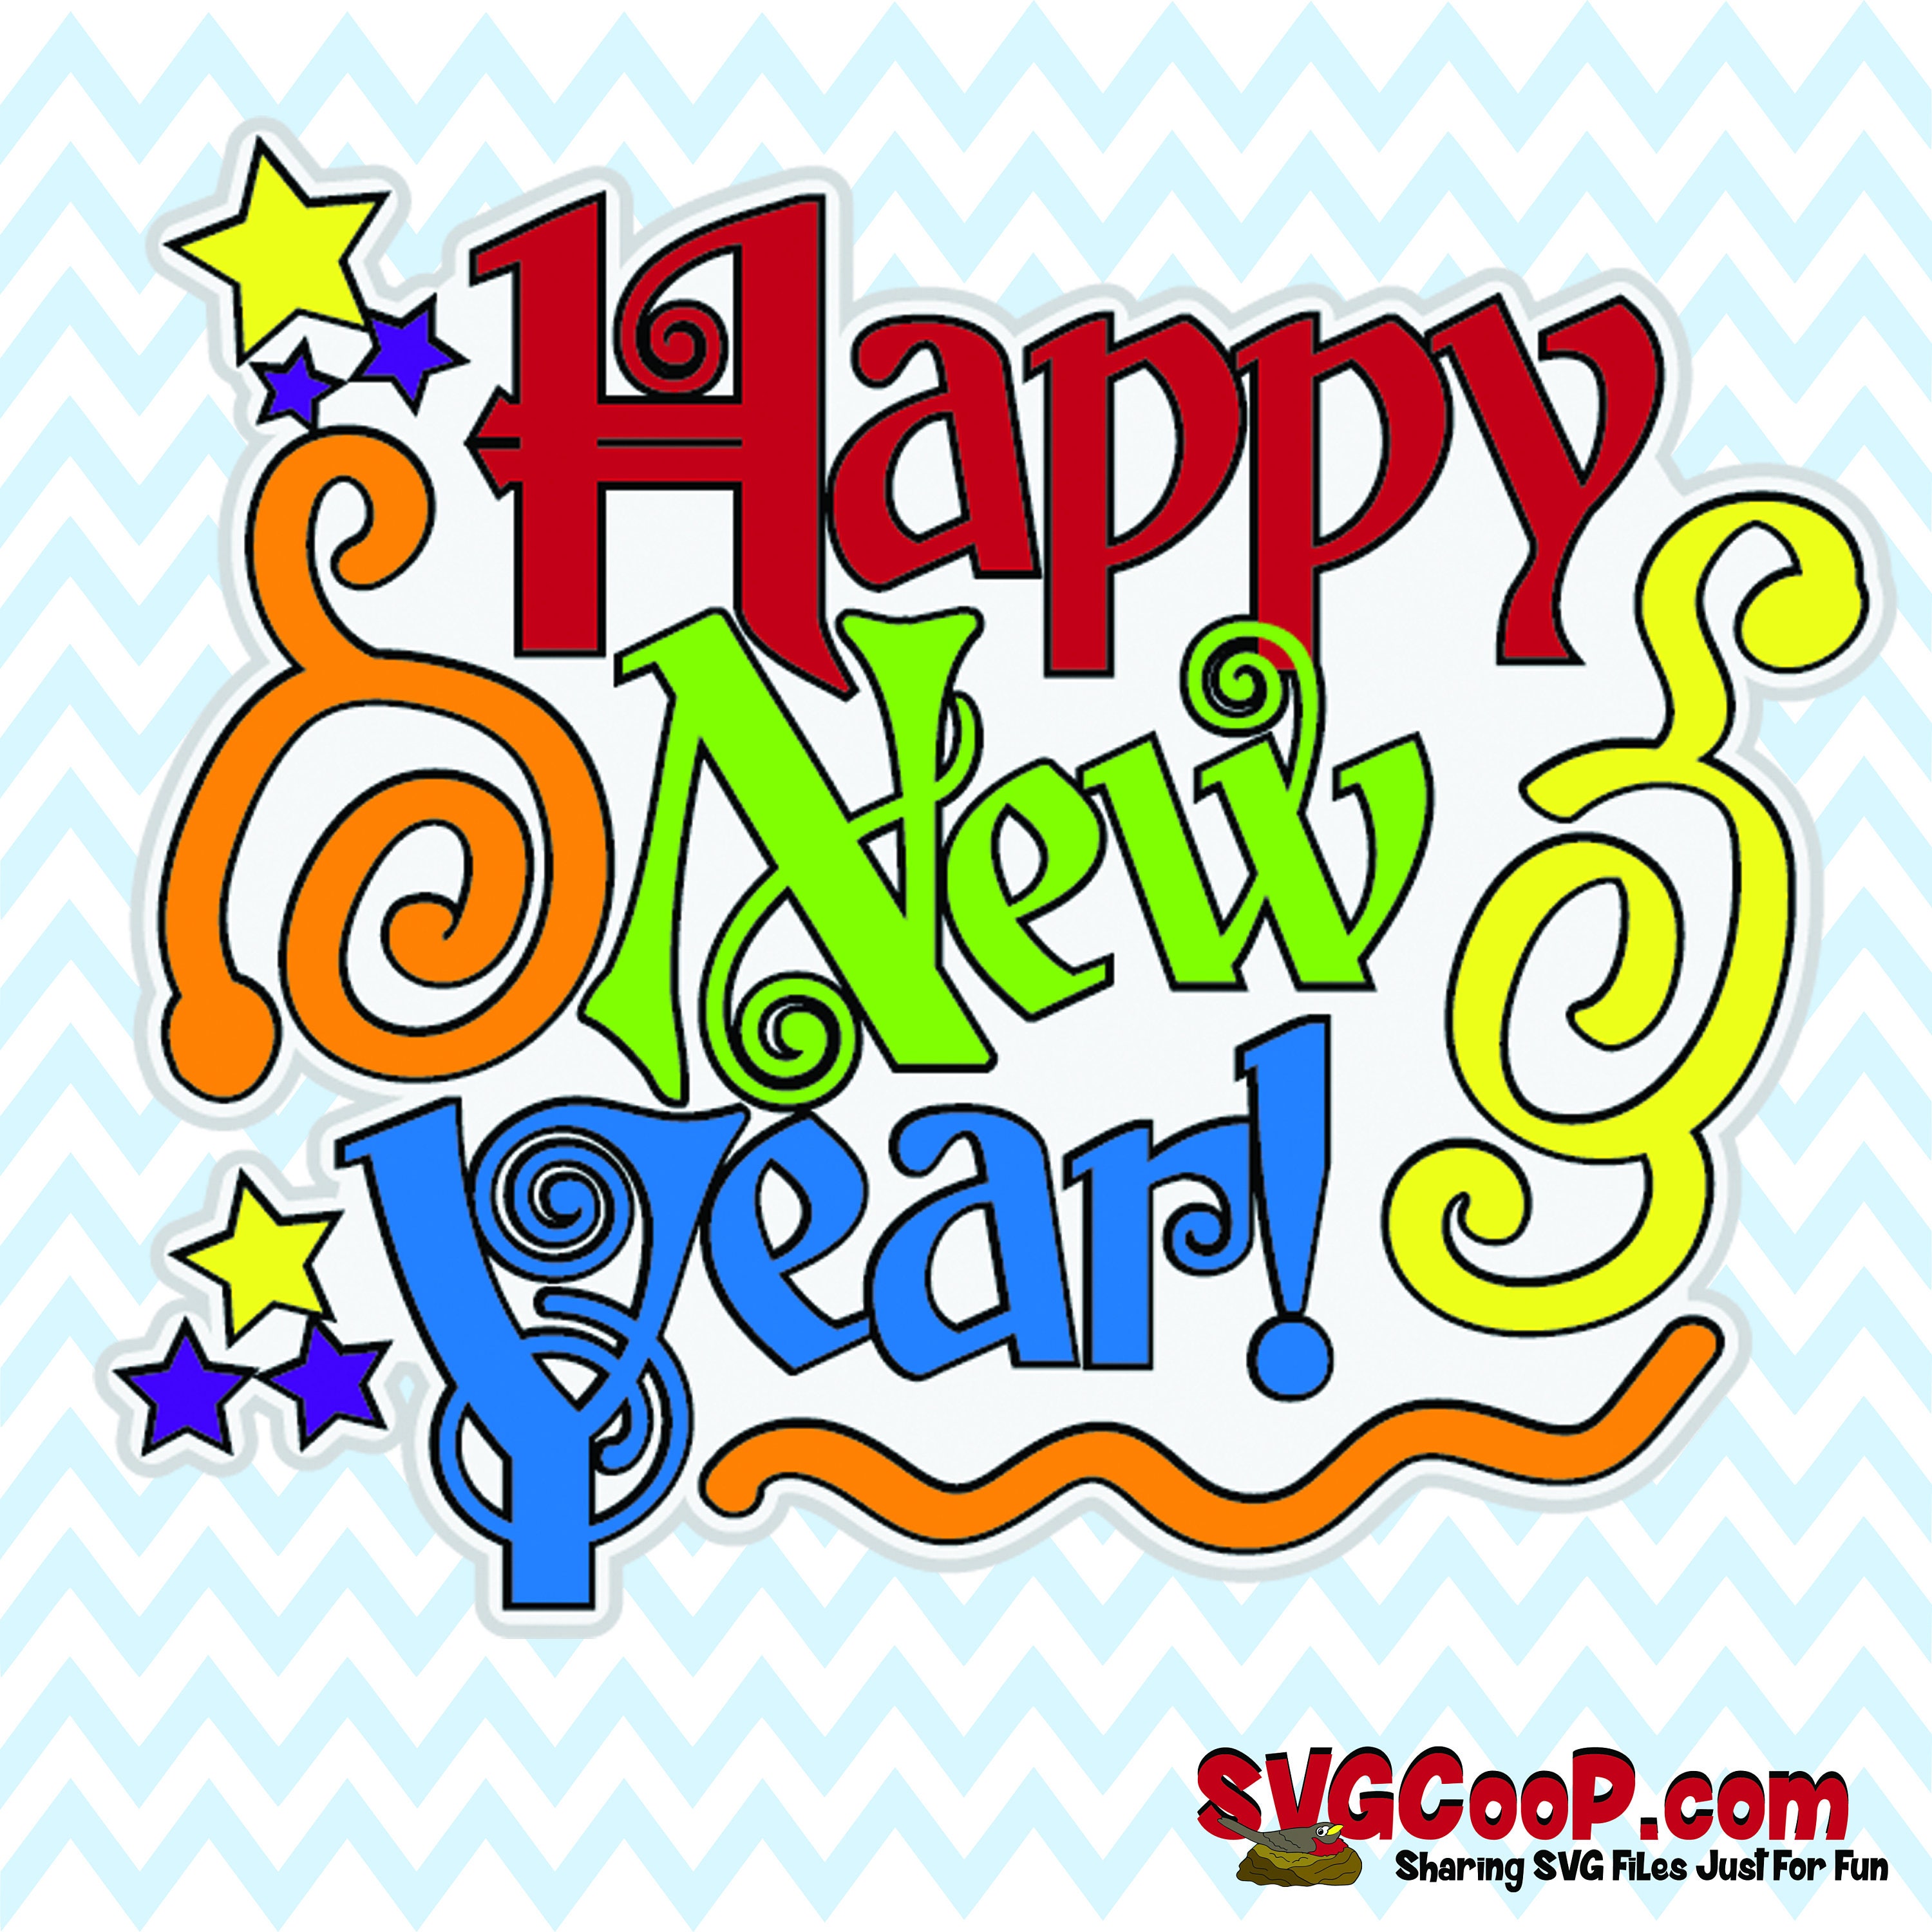 Download Happy New Year SVG dxf eps jpg png adorable holiday file